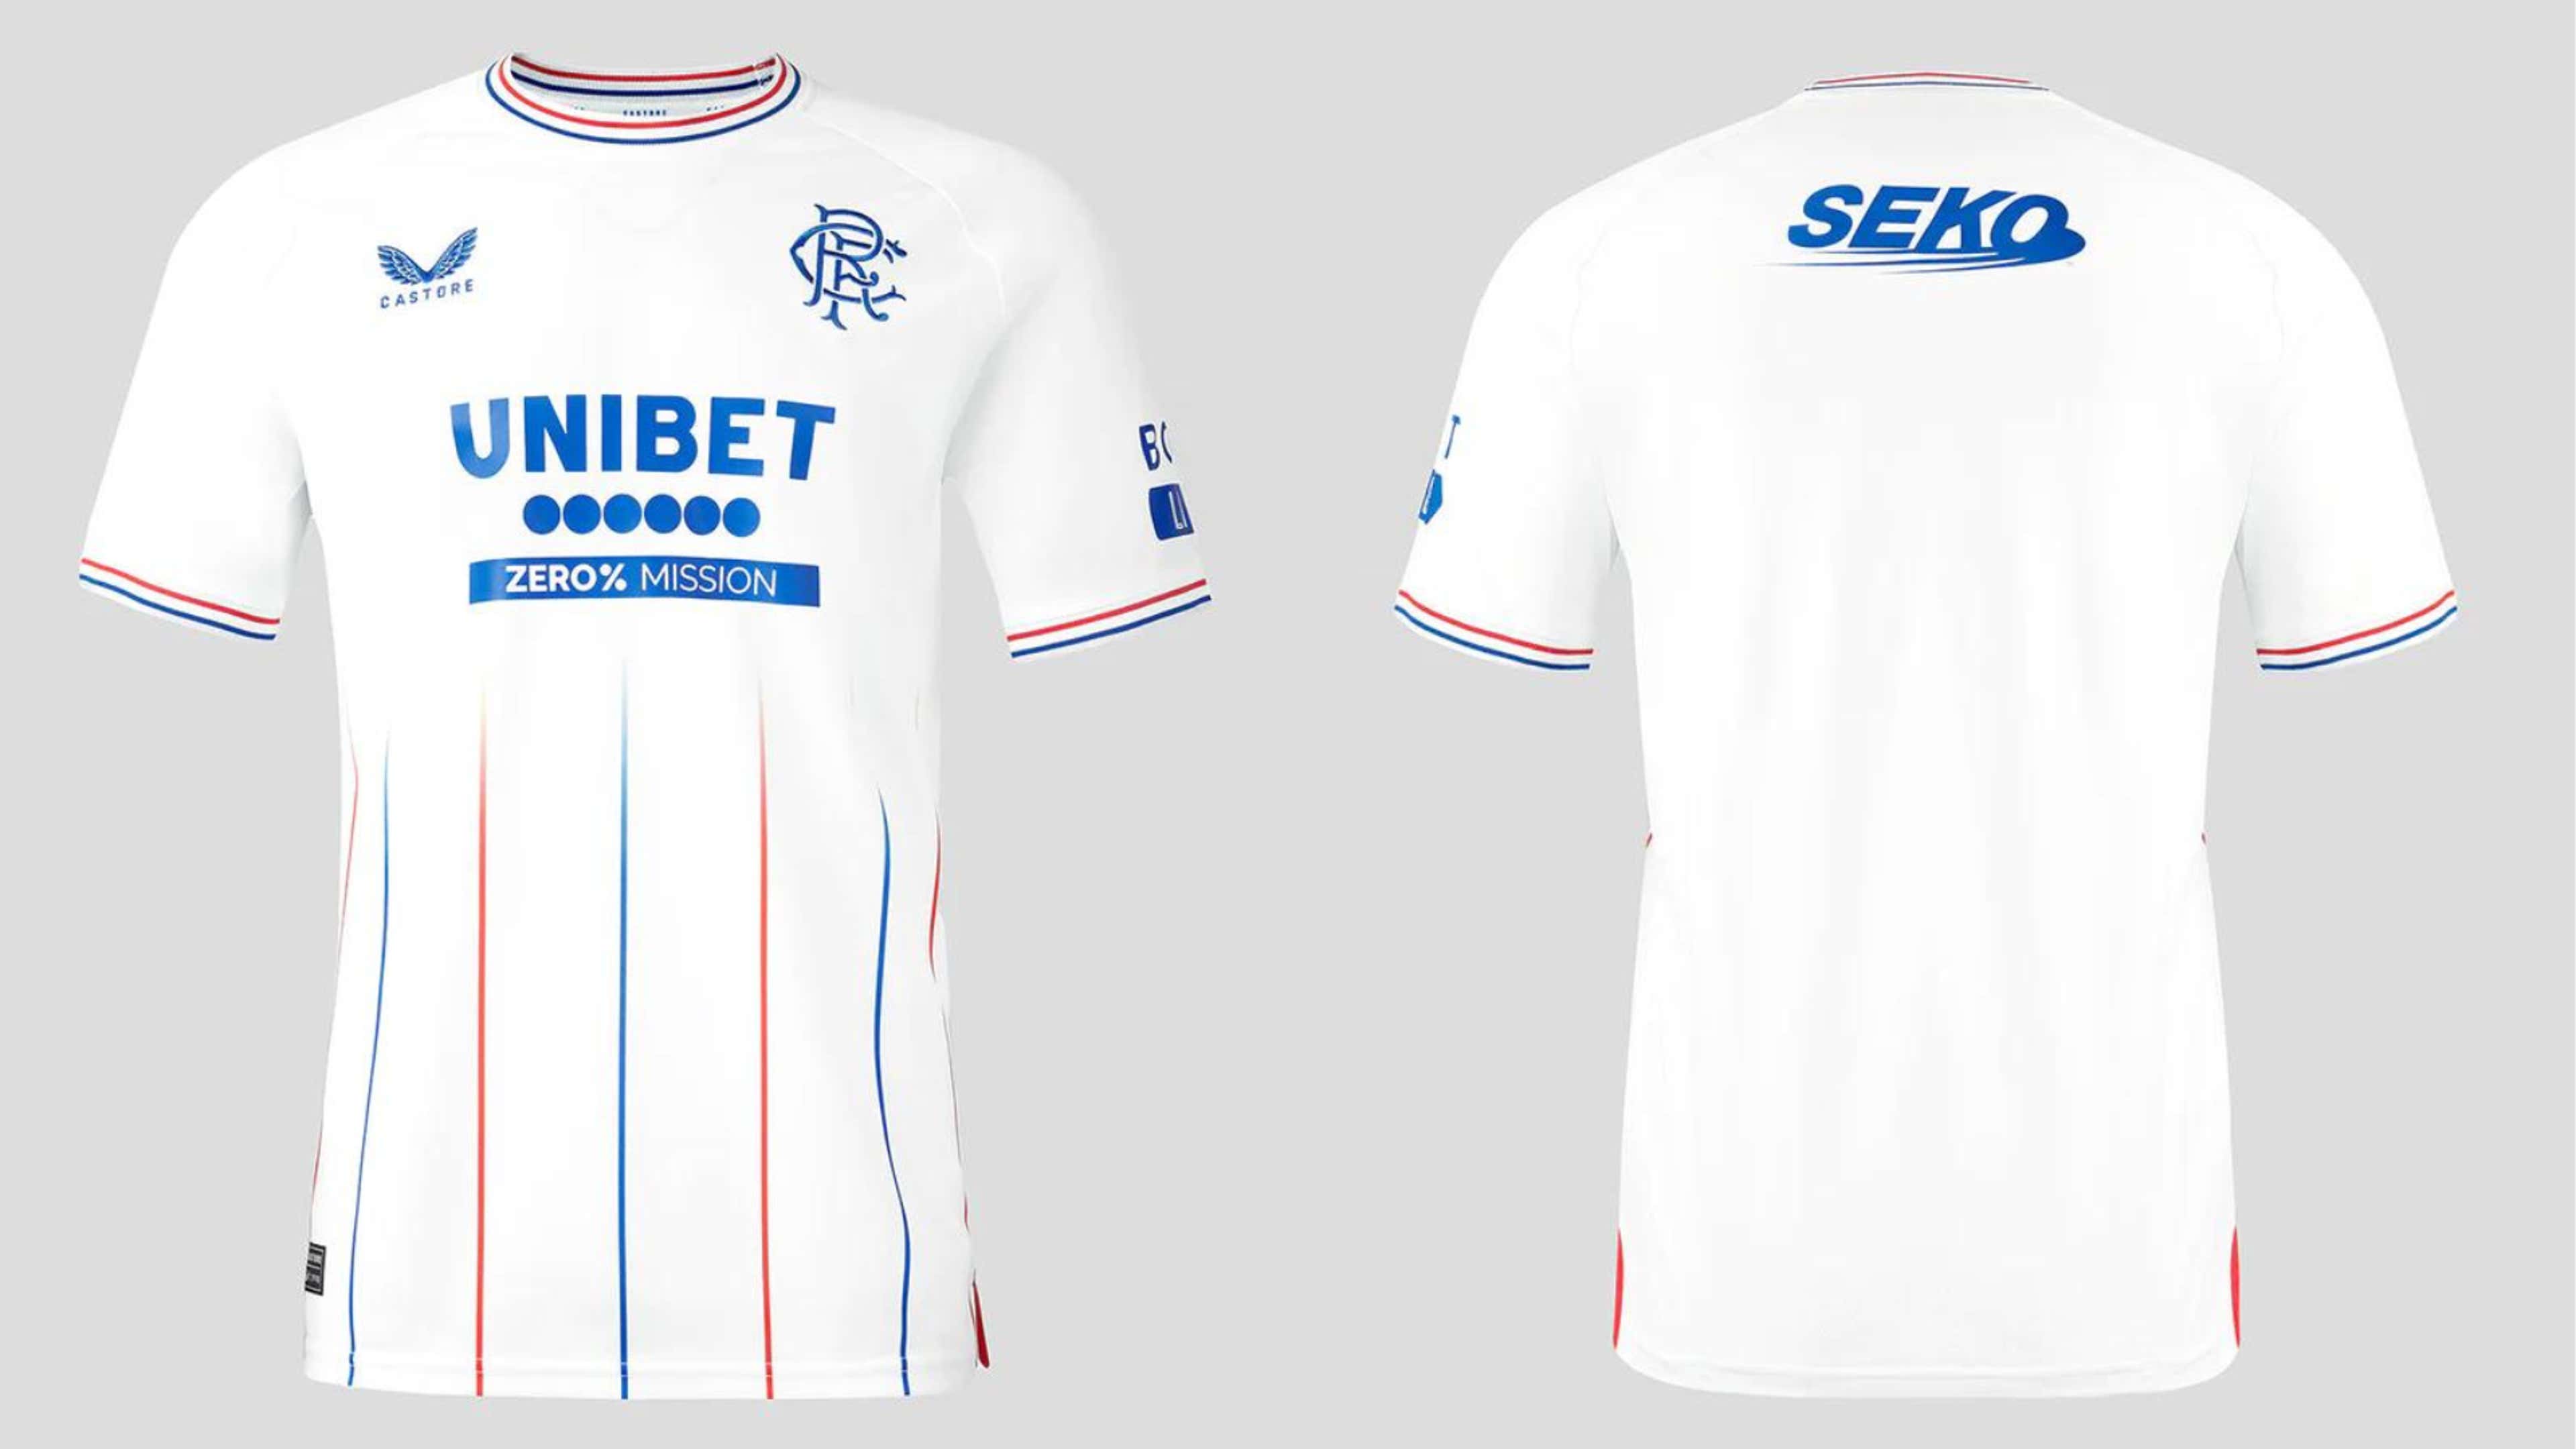 Is this a leaked image of a new Rangers kit?